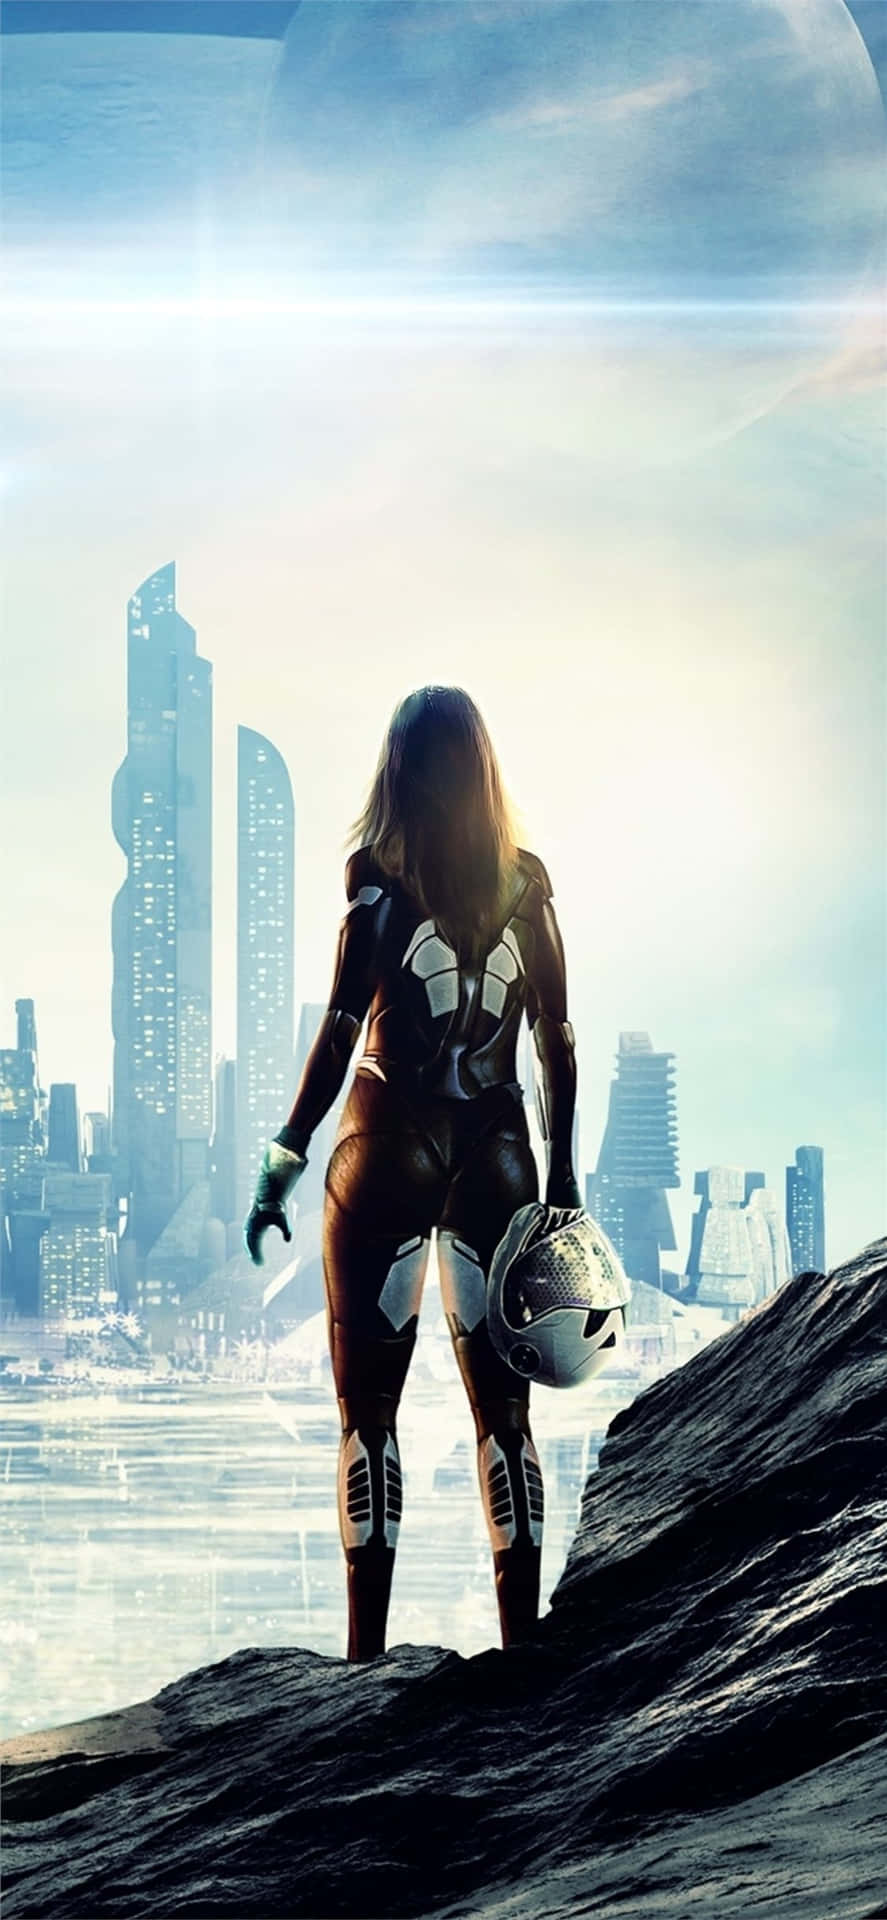 A Woman In Space Standing On A Rock With A City Behind Her